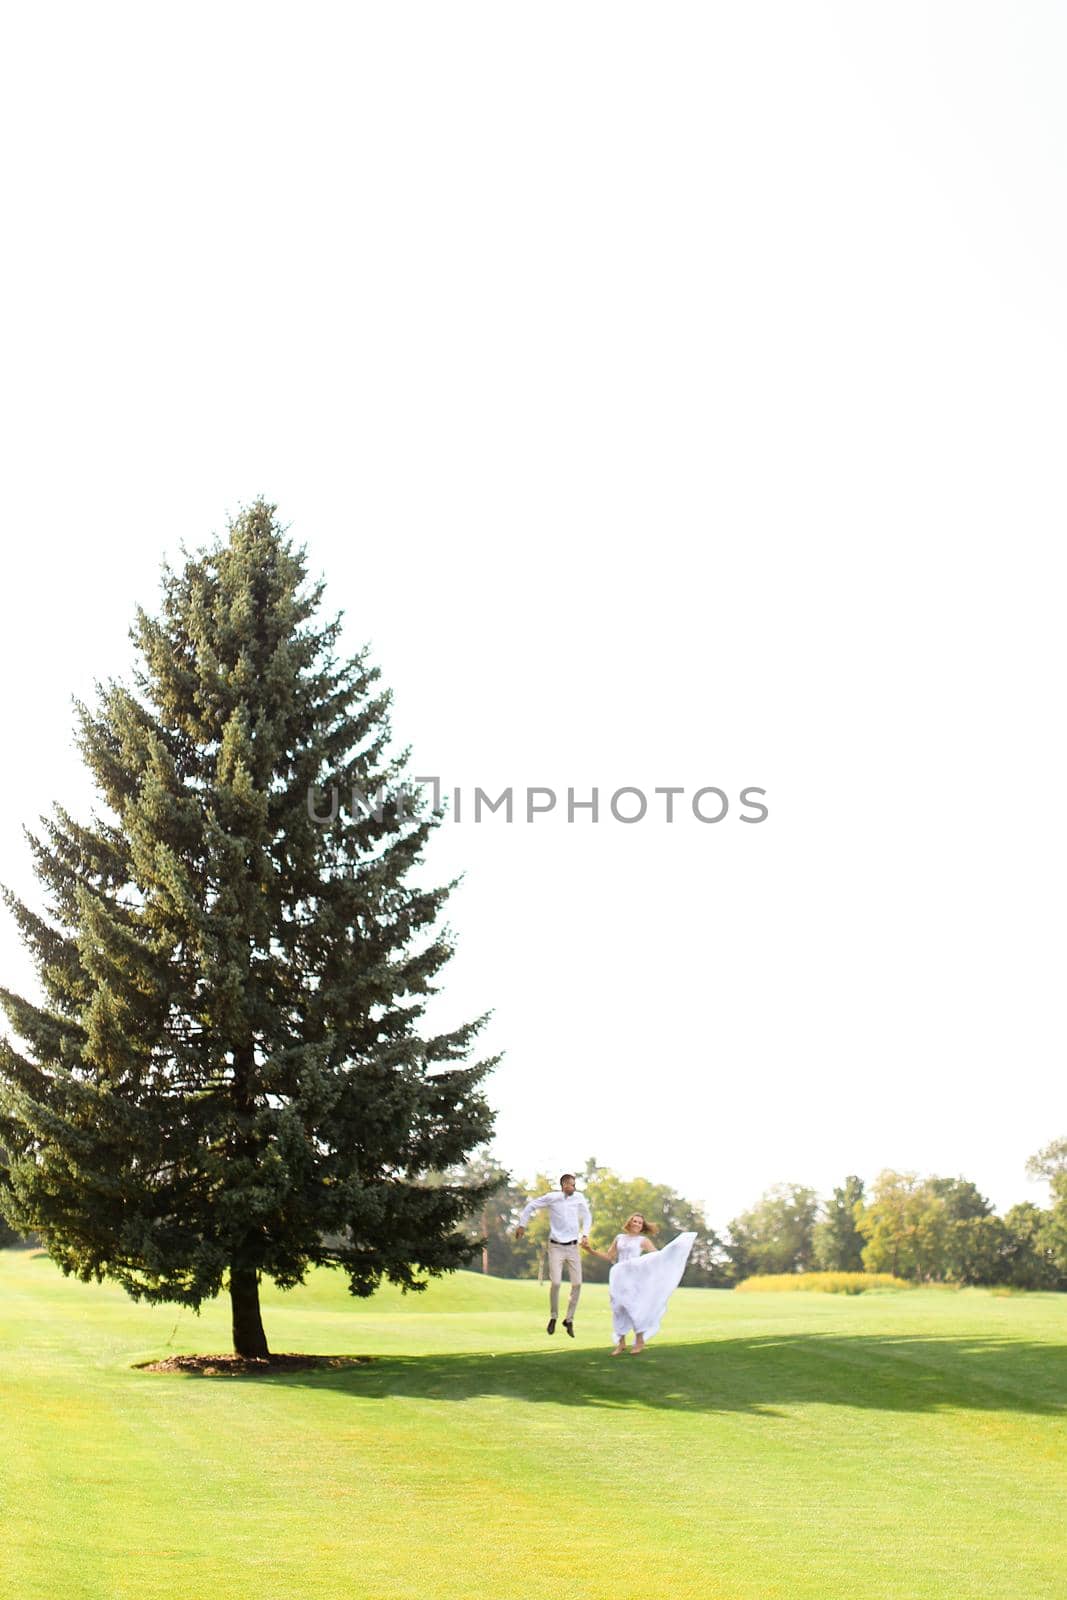 Young couple walking near green big spruce on grass in white sky background. Concept of evergreens and wedding.